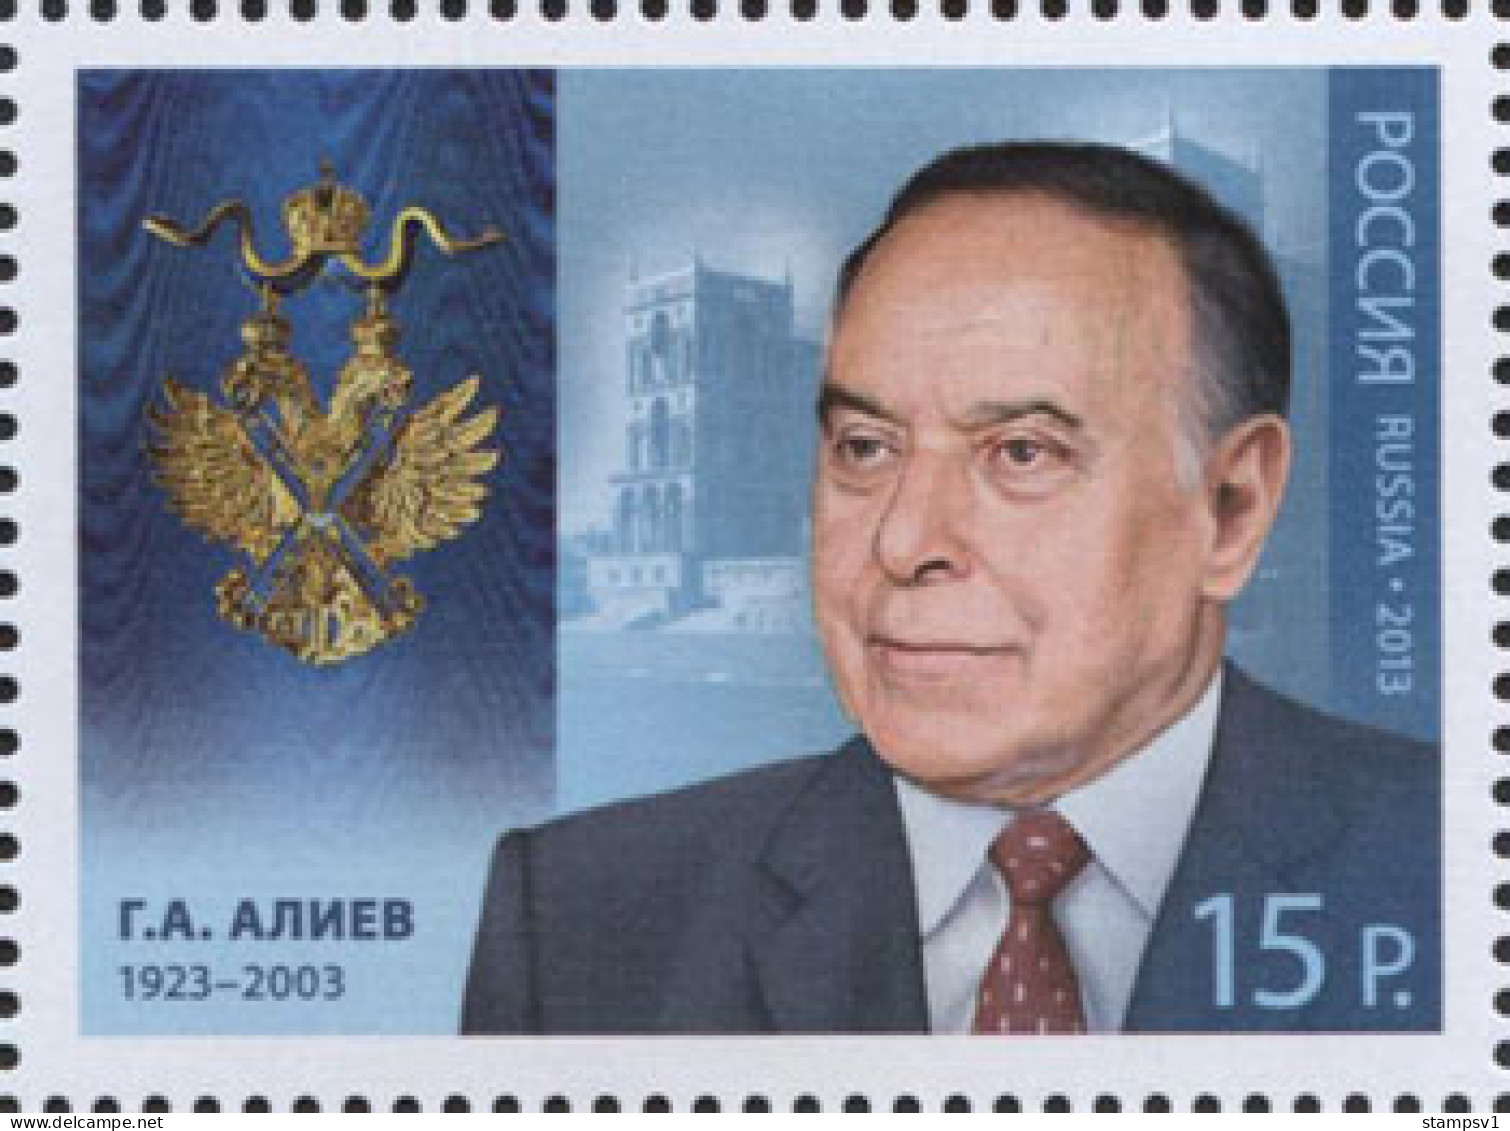 Russia 2013  Heydar Aliyev - Holder Of An Order Of St. Andrew The Apostle The First-Called. Mi 1926 - Unused Stamps